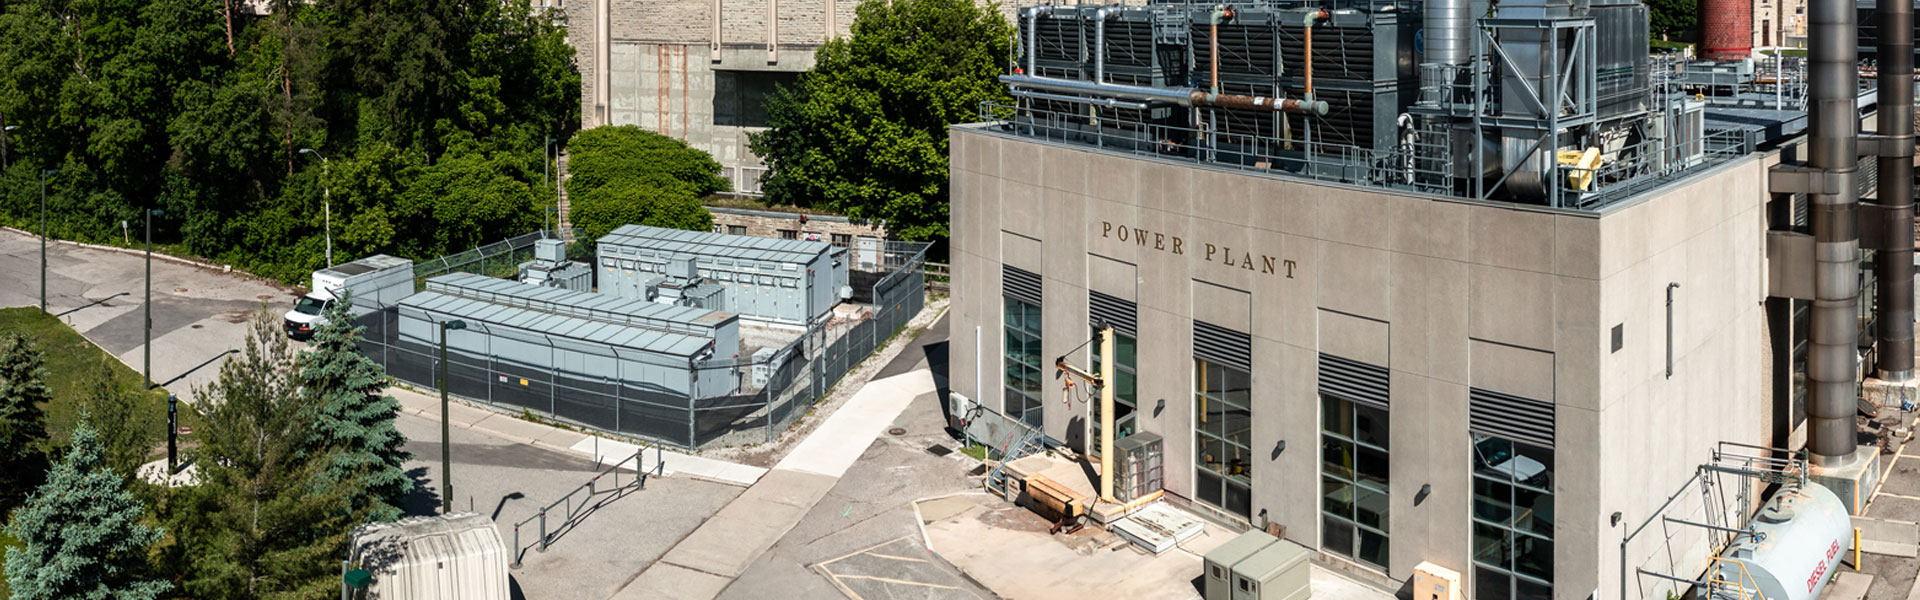 Aerial overhead look of the power plant exterior with the building's name in raised lettering across the front of the building.